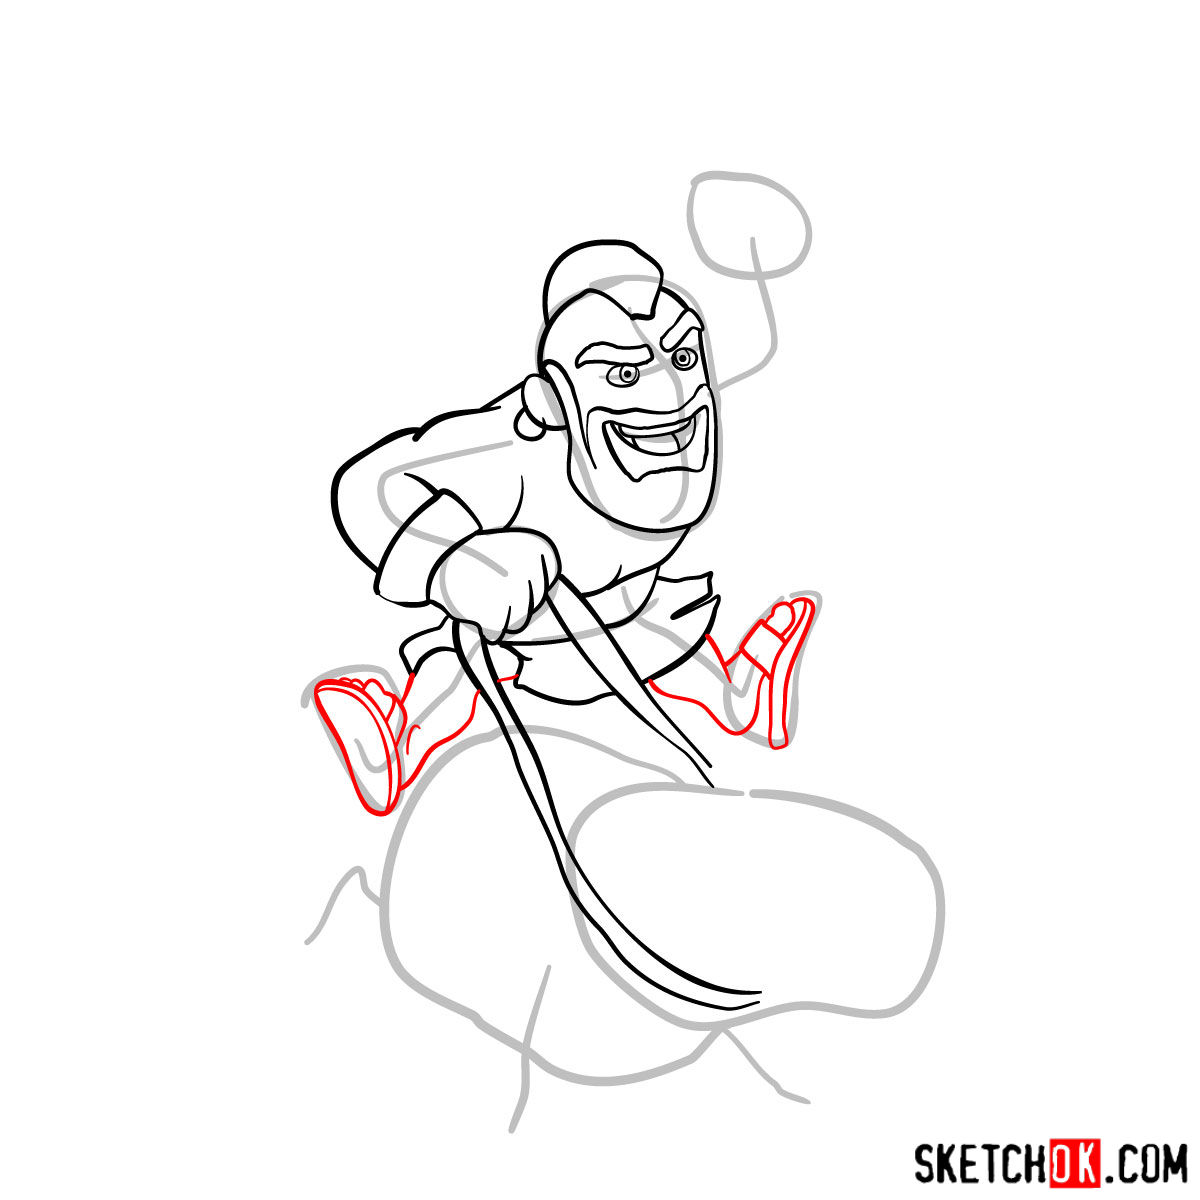 How to draw Hog Rider from Clash of Clans - step 07